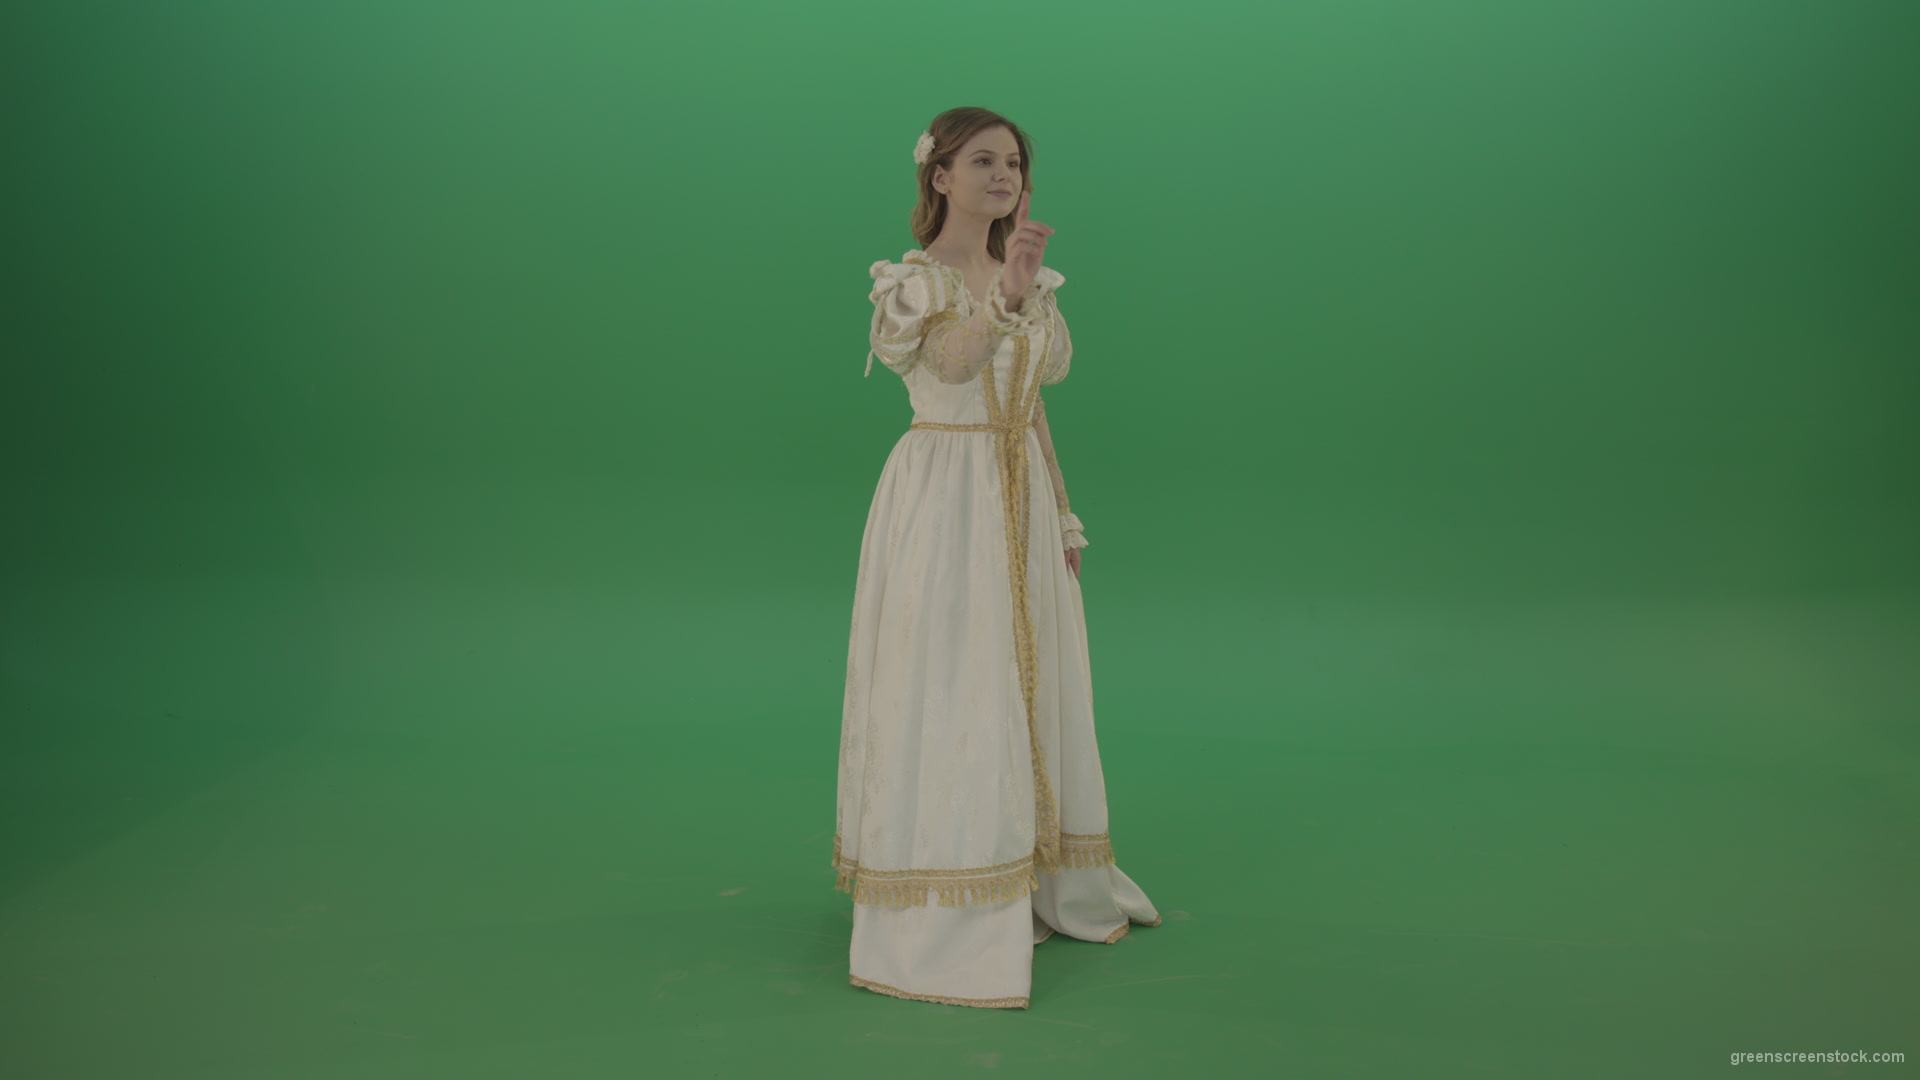 Flips-touchscreen-in-a-white-suit-of-a-medieval-woman-isolated-on-green-screen_002 Green Screen Stock